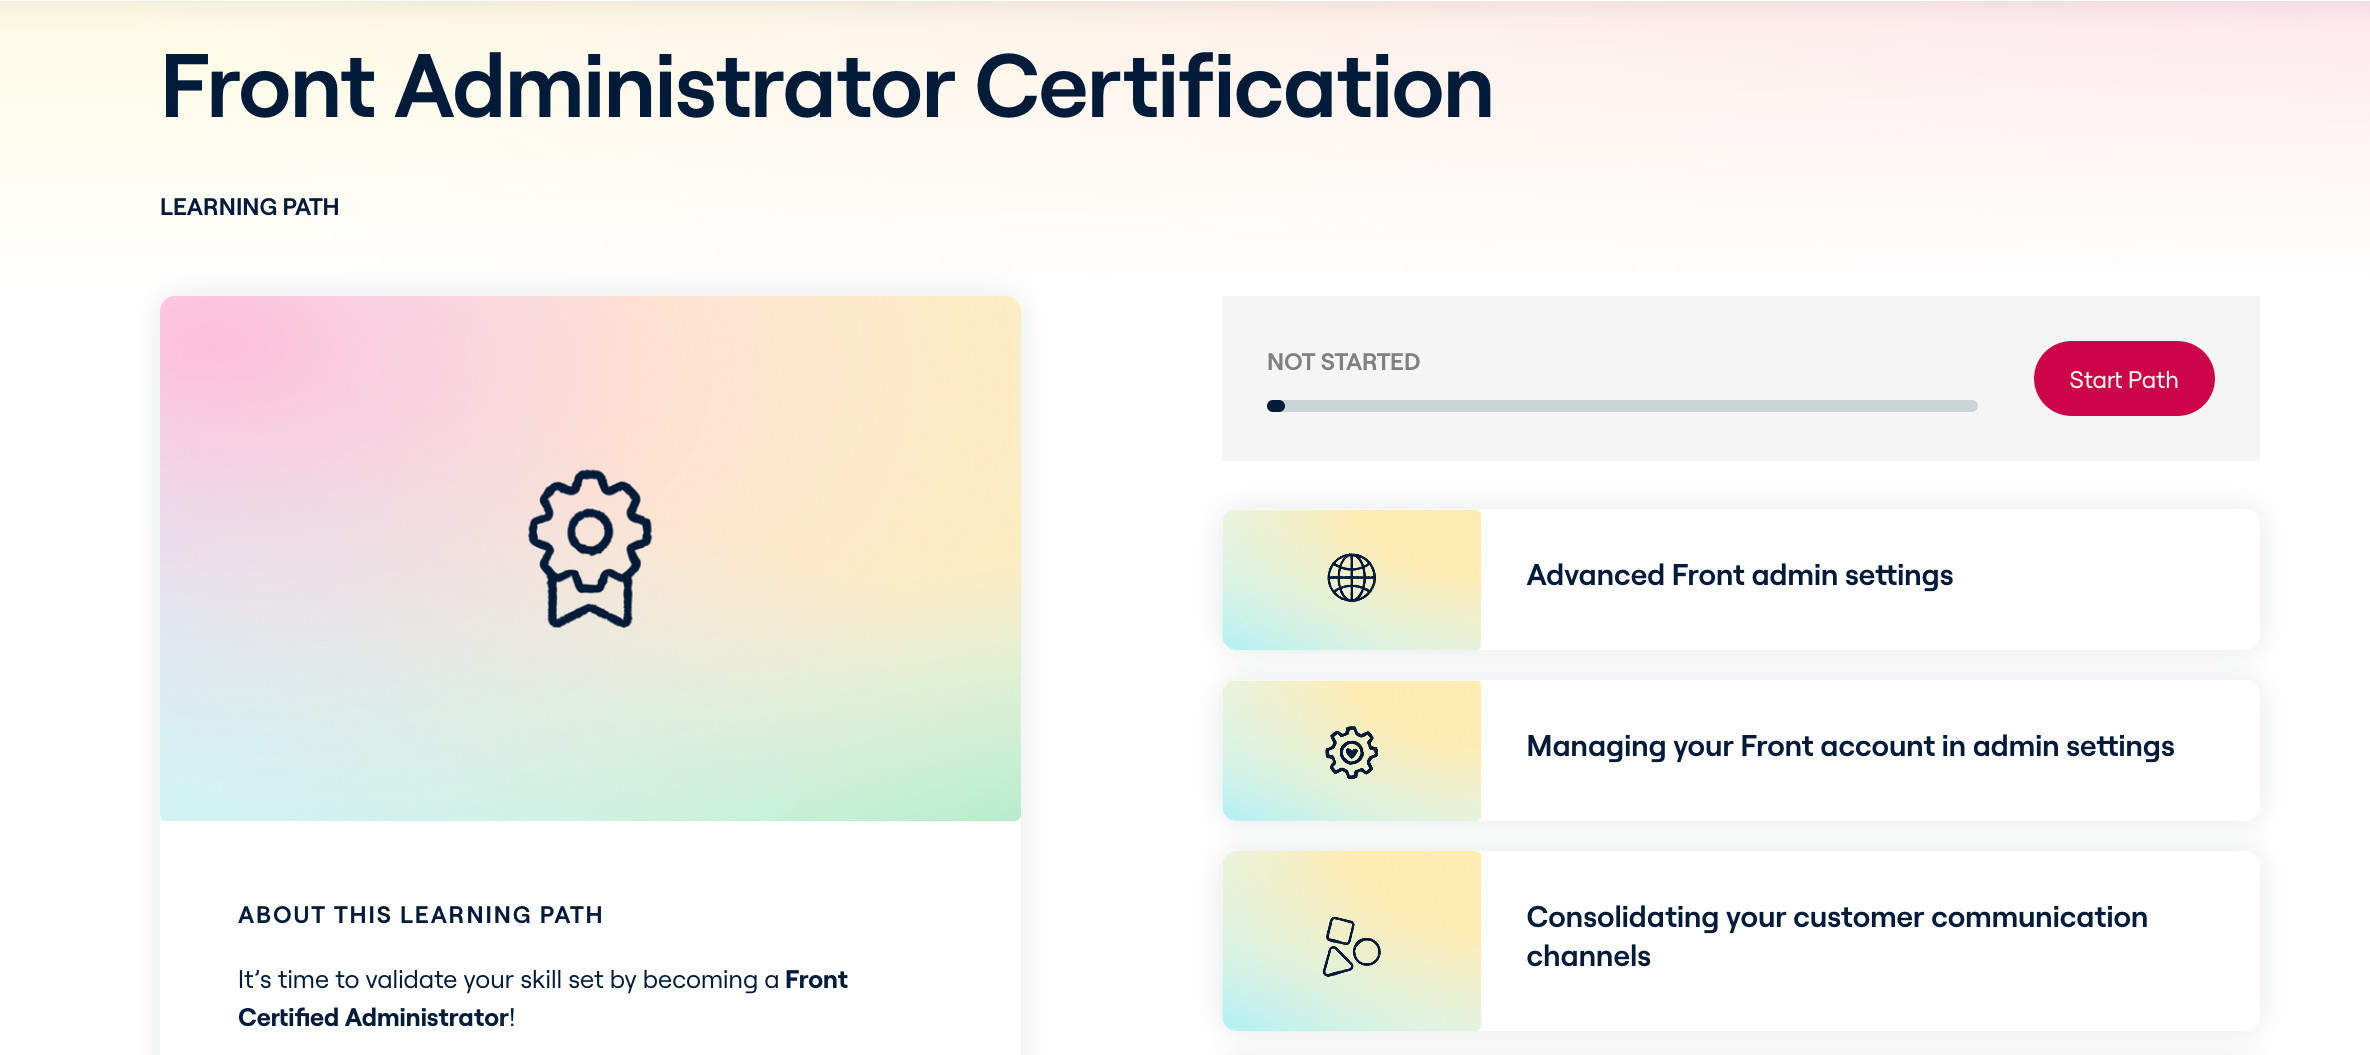 Become a Front Certified Administrator